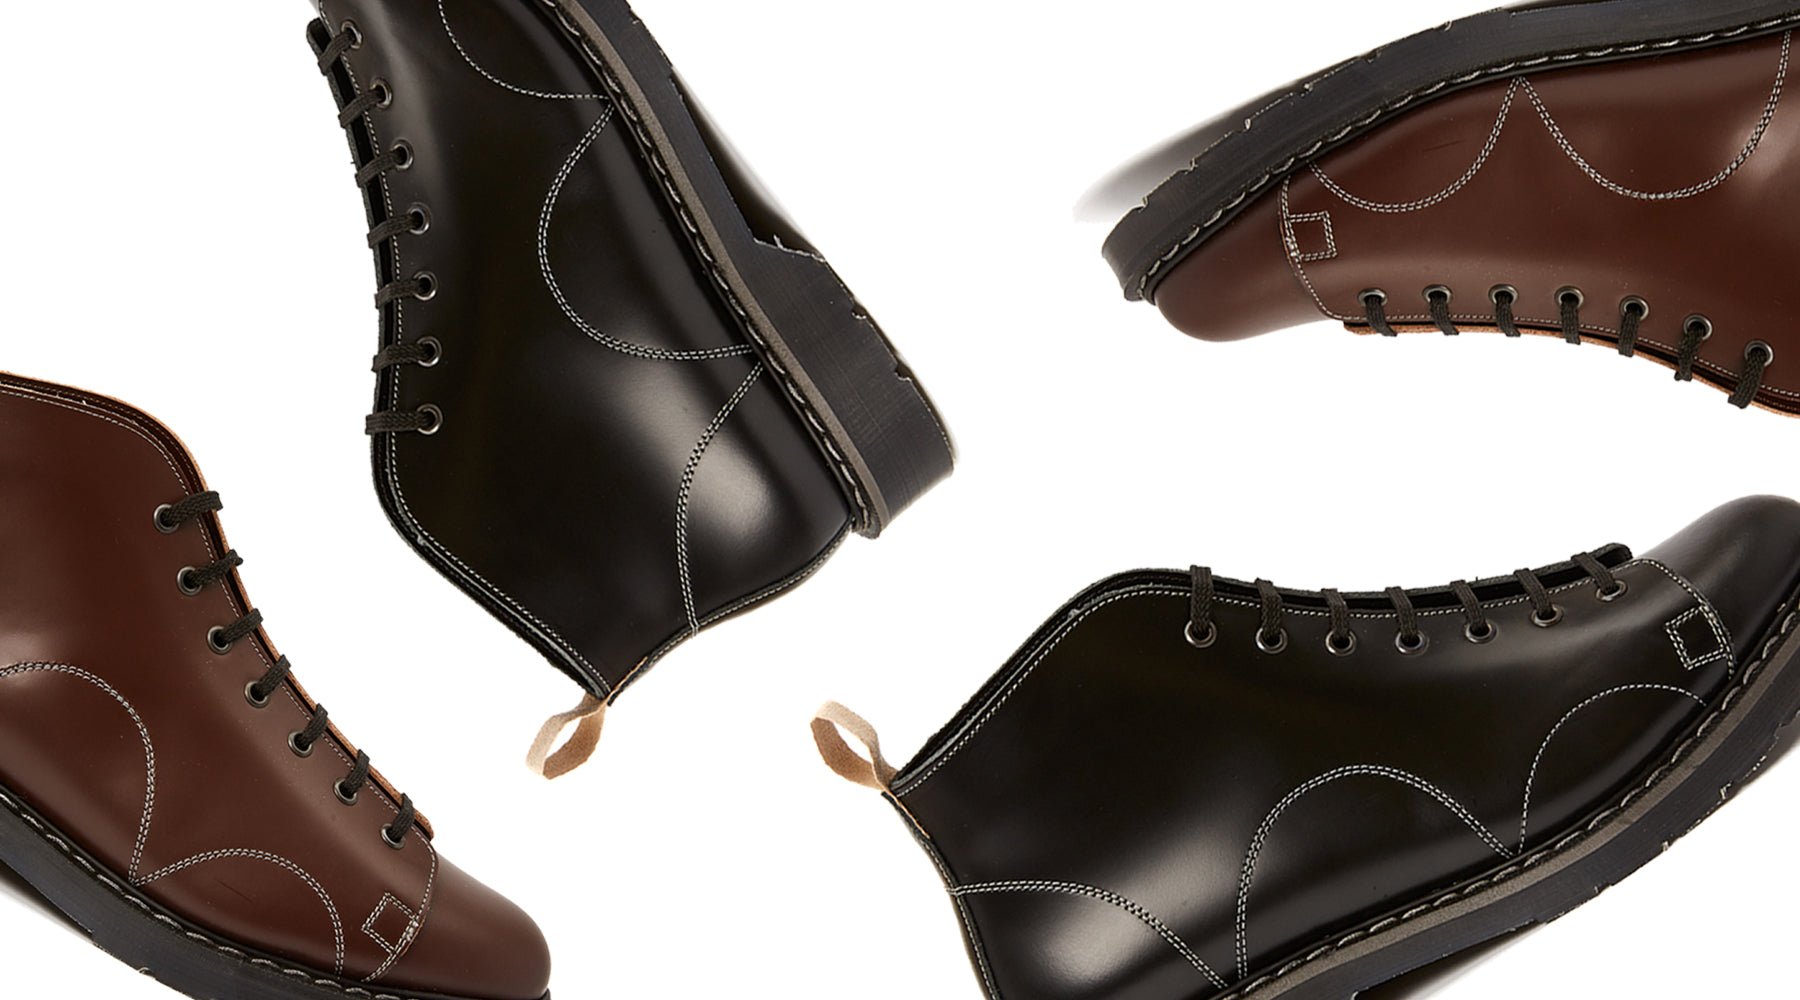 Monkey magic - the new Solovair x Oliver Spencer monkey boots